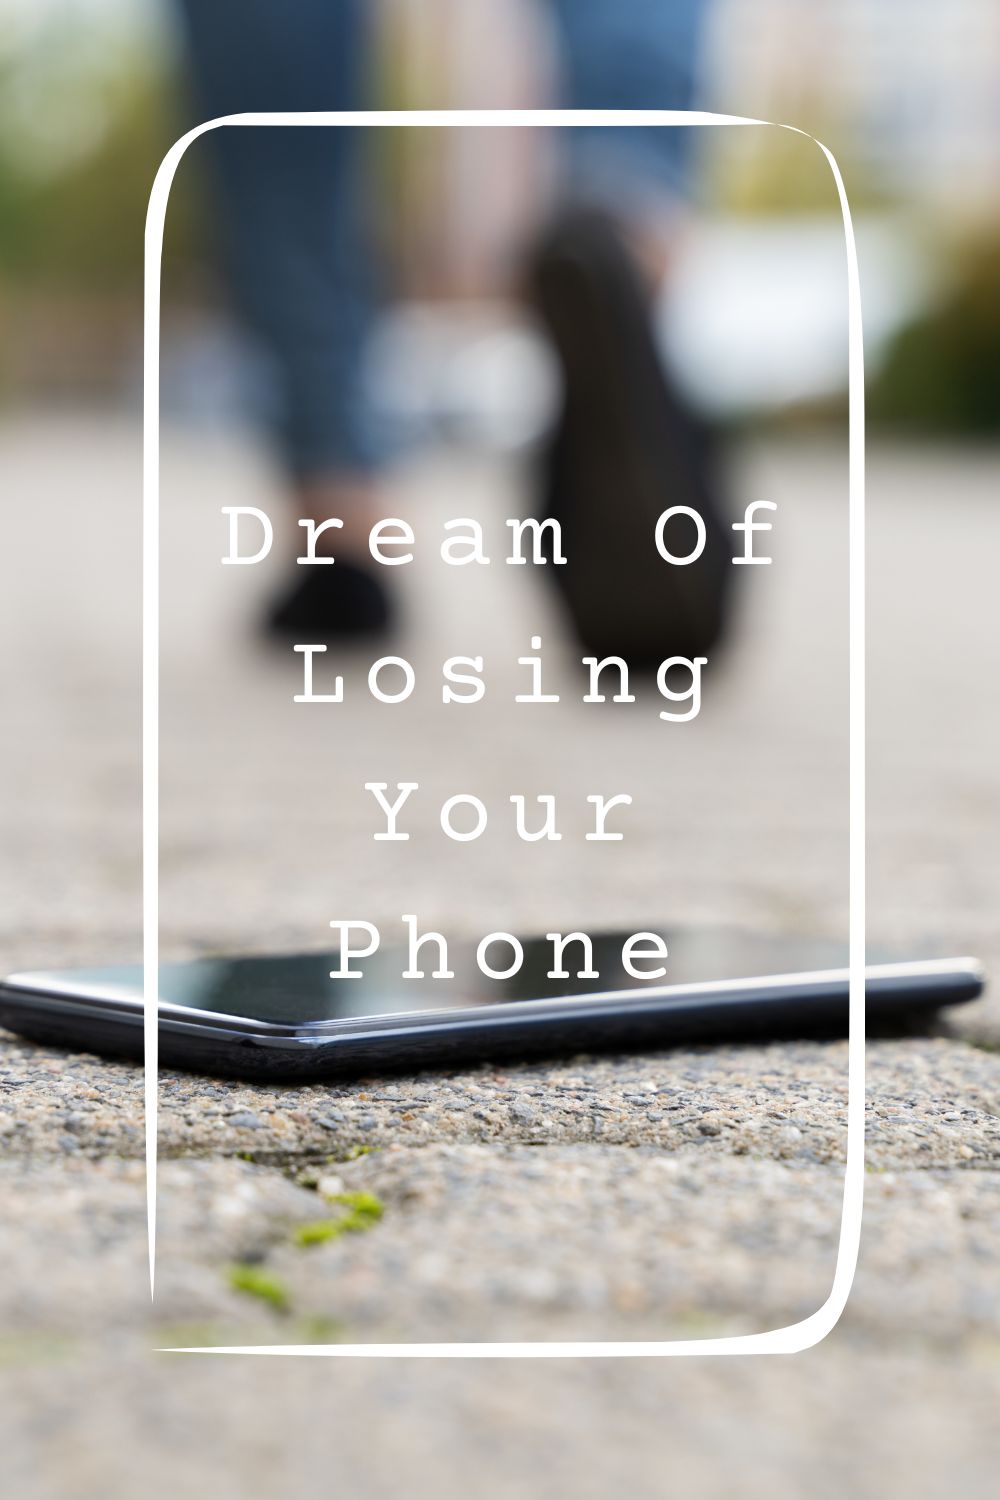 Dream Of Losing Your Phone Meanings 1